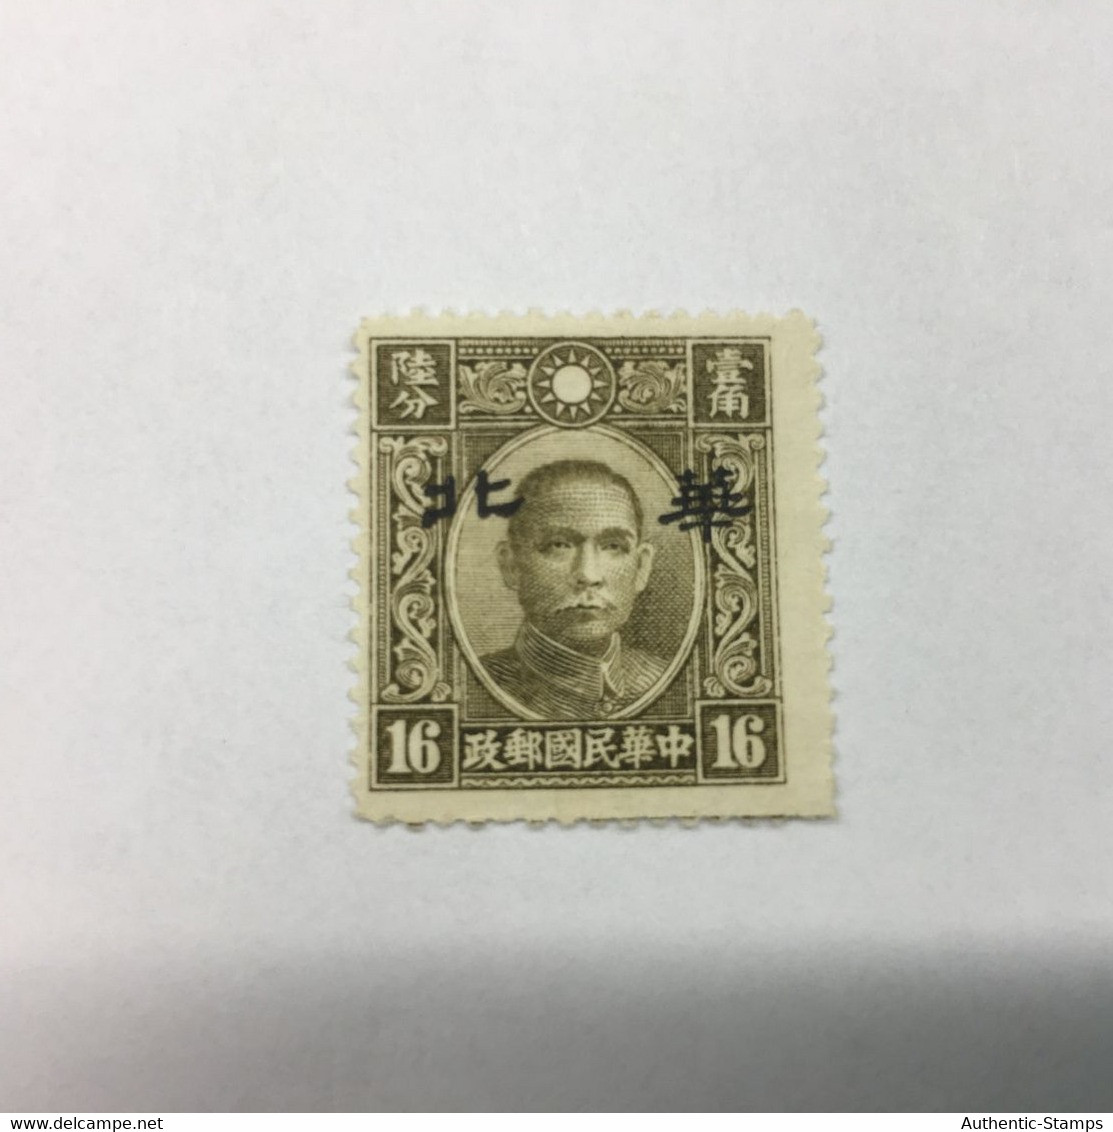 CHINA STAMP, UNUSED, TIMBRO, STEMPEL, CINA, CHINE, LIST 5808 - 1941-45 Cina Del Nord